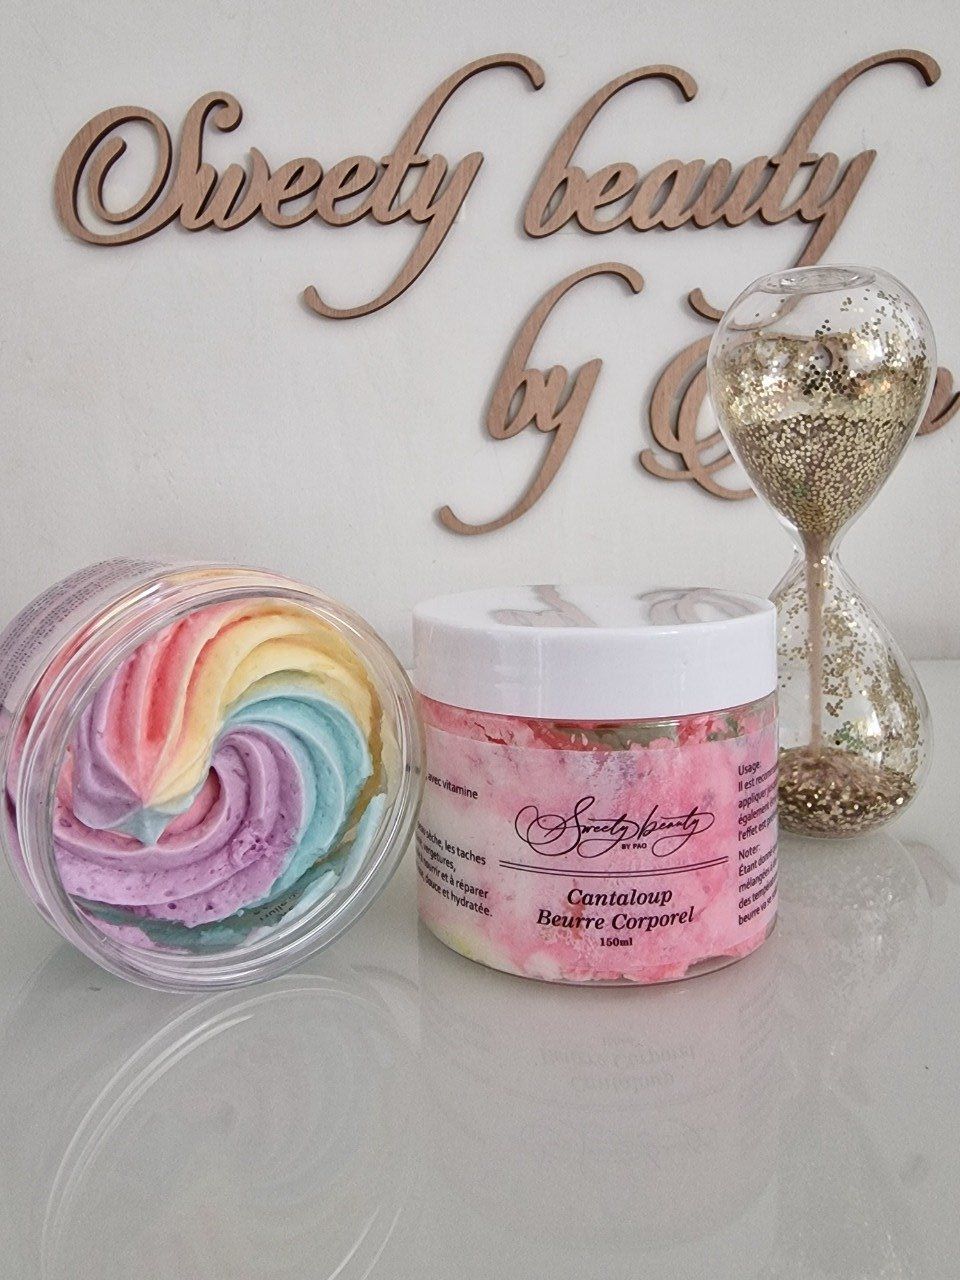 Crème Chantilly karité - Sweetybeautybypao